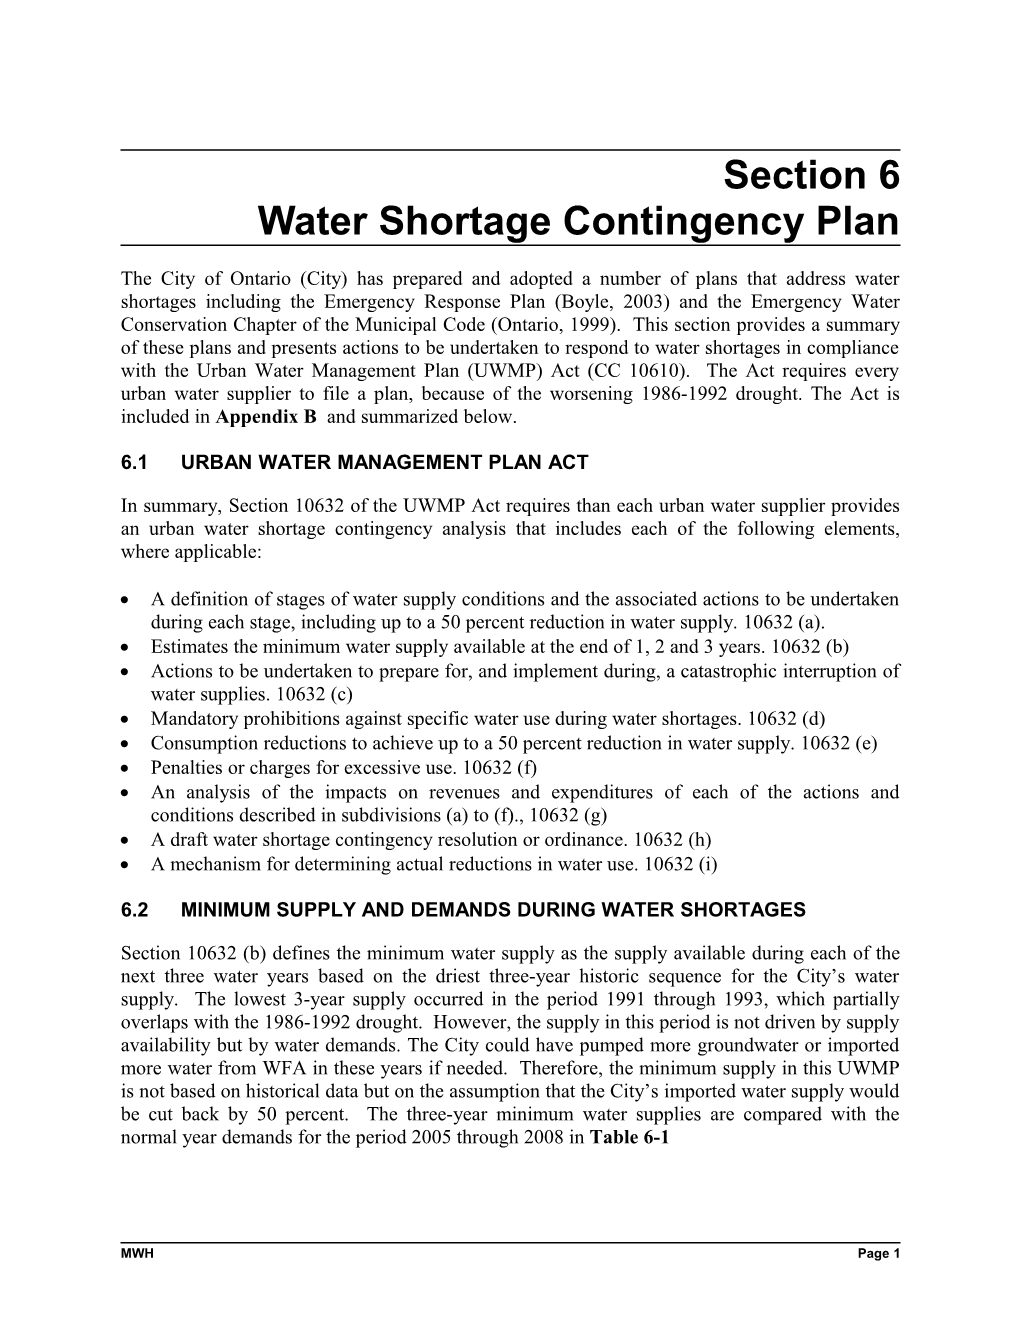 Section 6 Water Shortage Contingency Plan